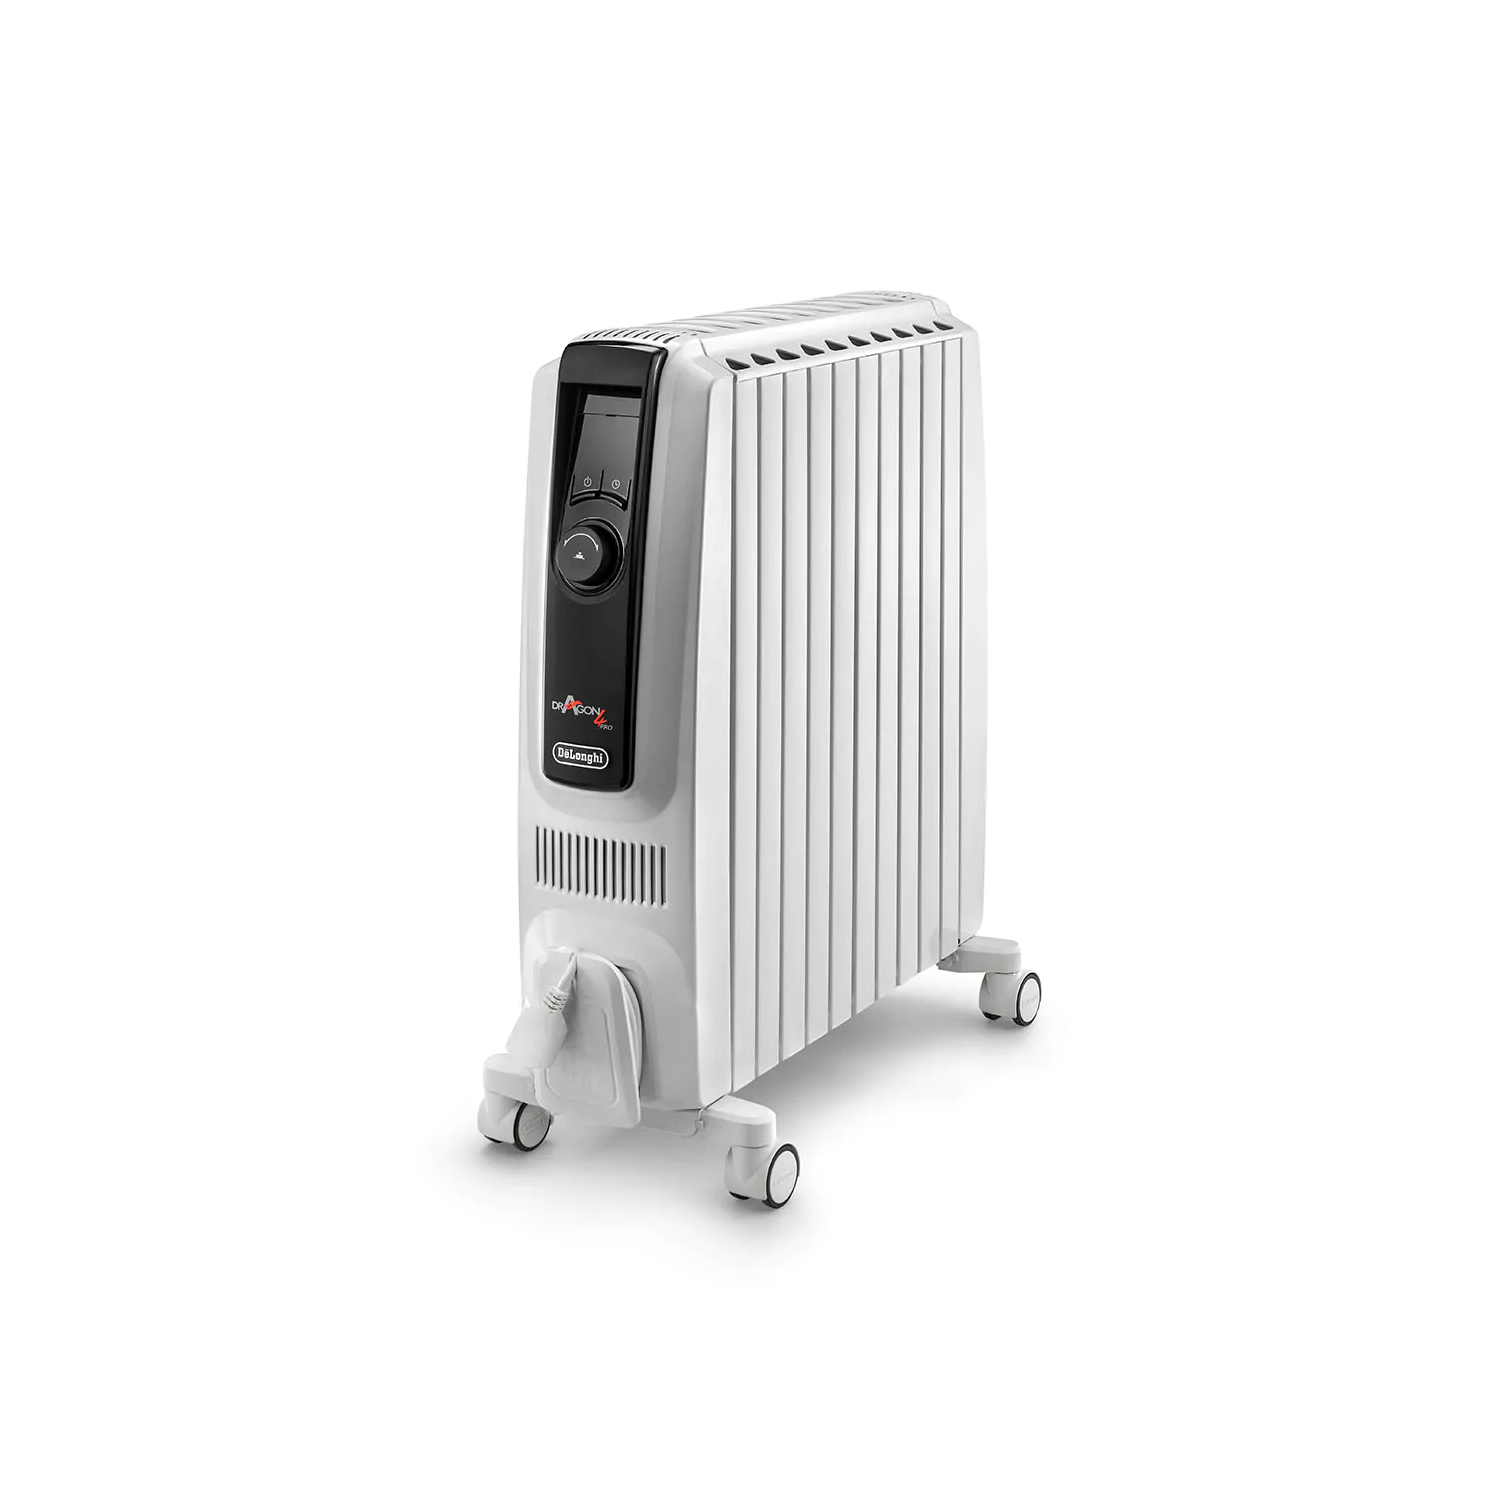 DeLonghi Dragon 4 2.5kW Oil Filled Radiator 10 Fin with Digital Display & Increased Radiant Surface 